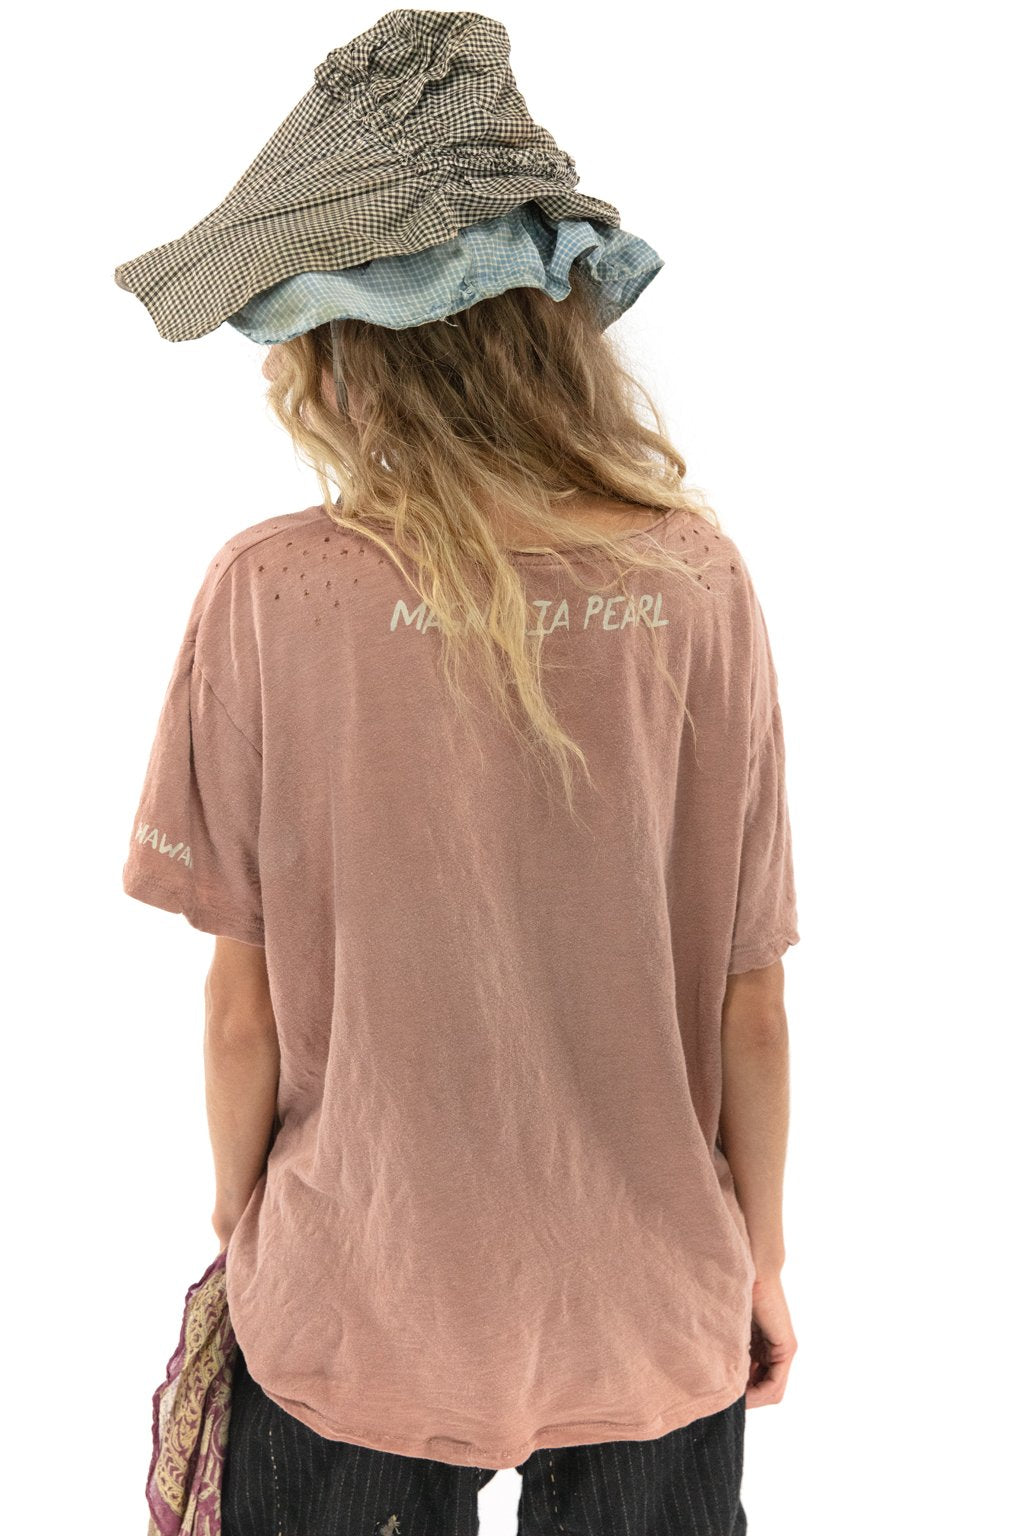 HANG LOOSE TEE - Kingfisher Road - Online Boutique